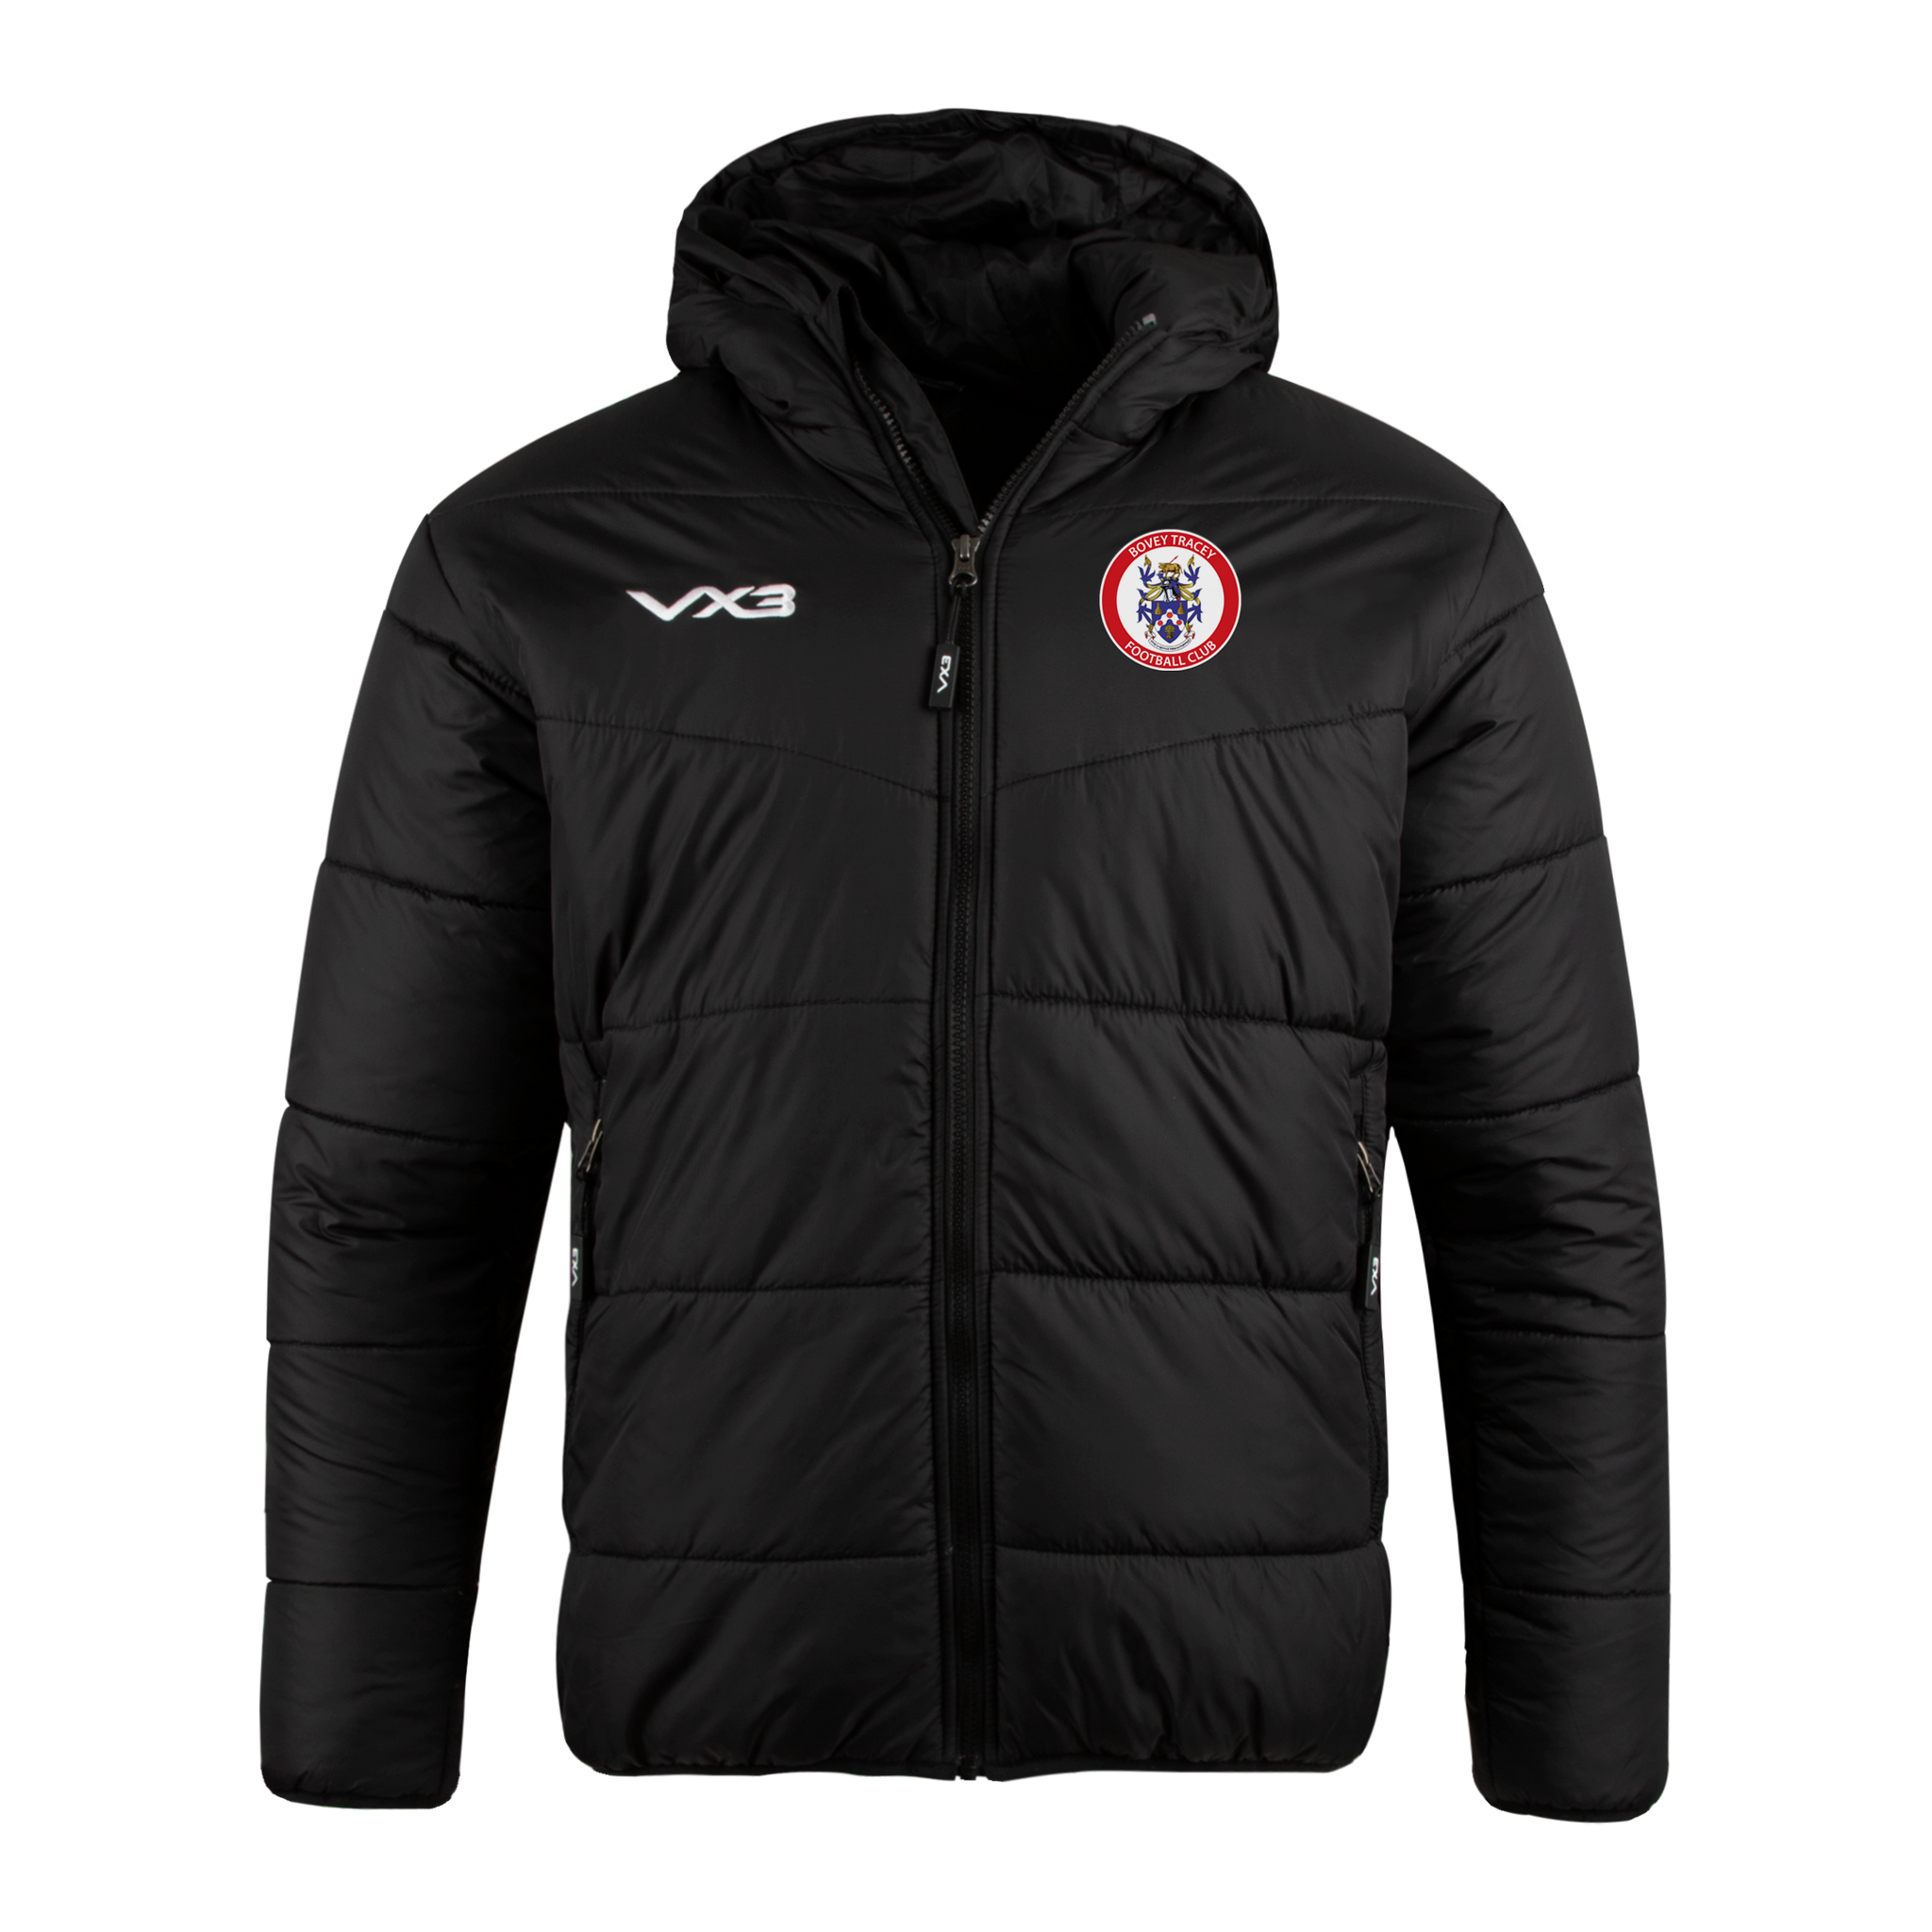 Bovey Tracey AFC Lorica Quilted Jacket